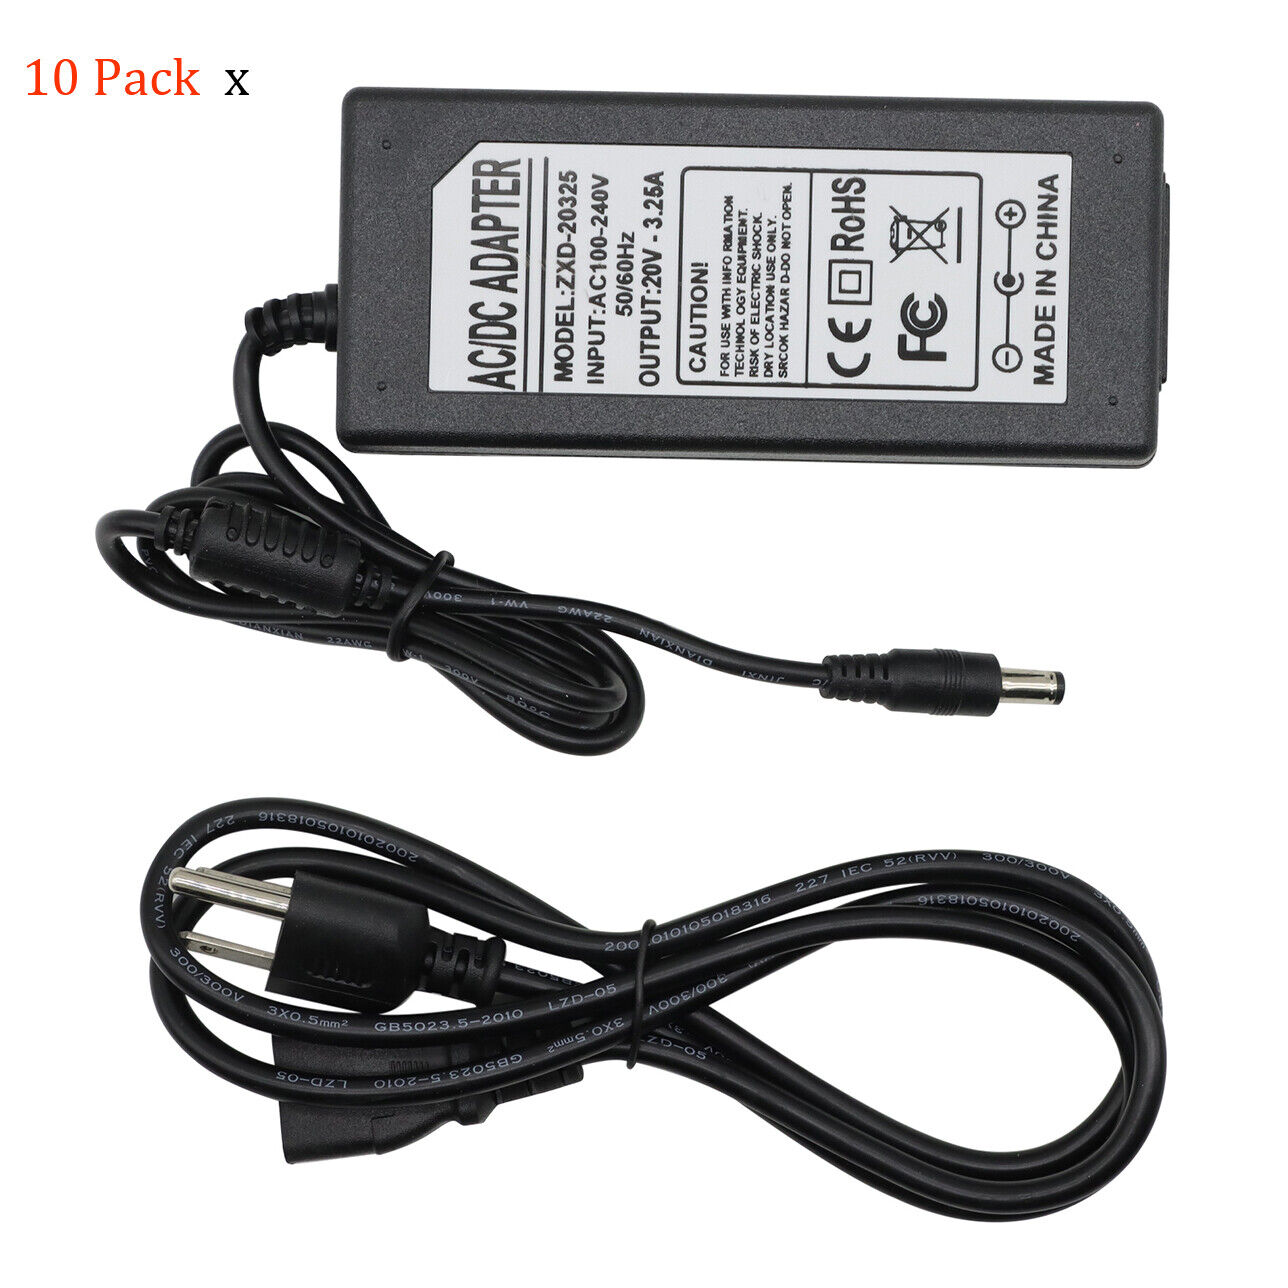 10Pack AC Adapter Charger Power Supply Cord fits Zebra LP2824 LP2844 Printer